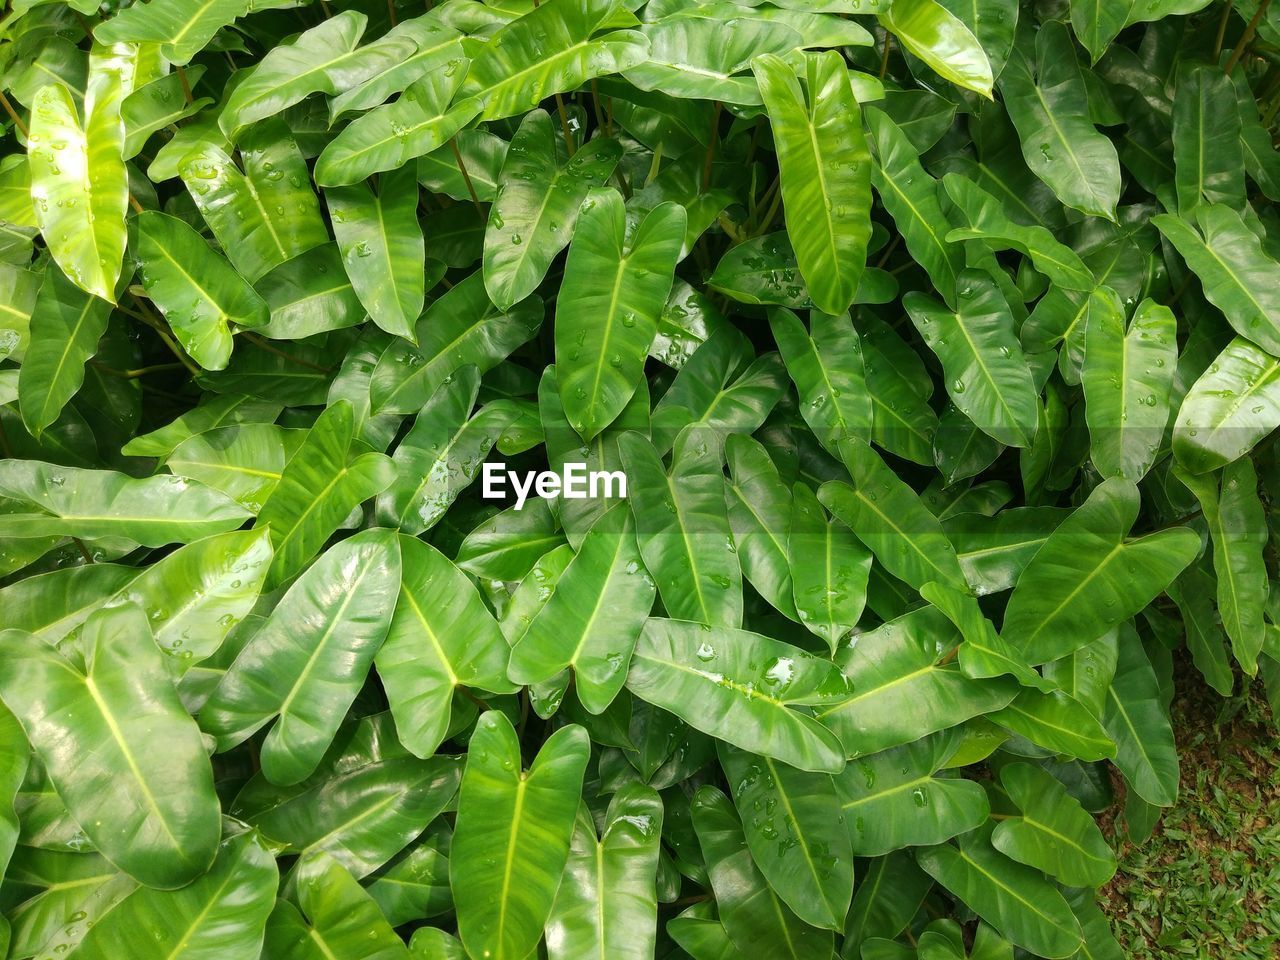 HIGH ANGLE VIEW OF CHOPPED LEAVES